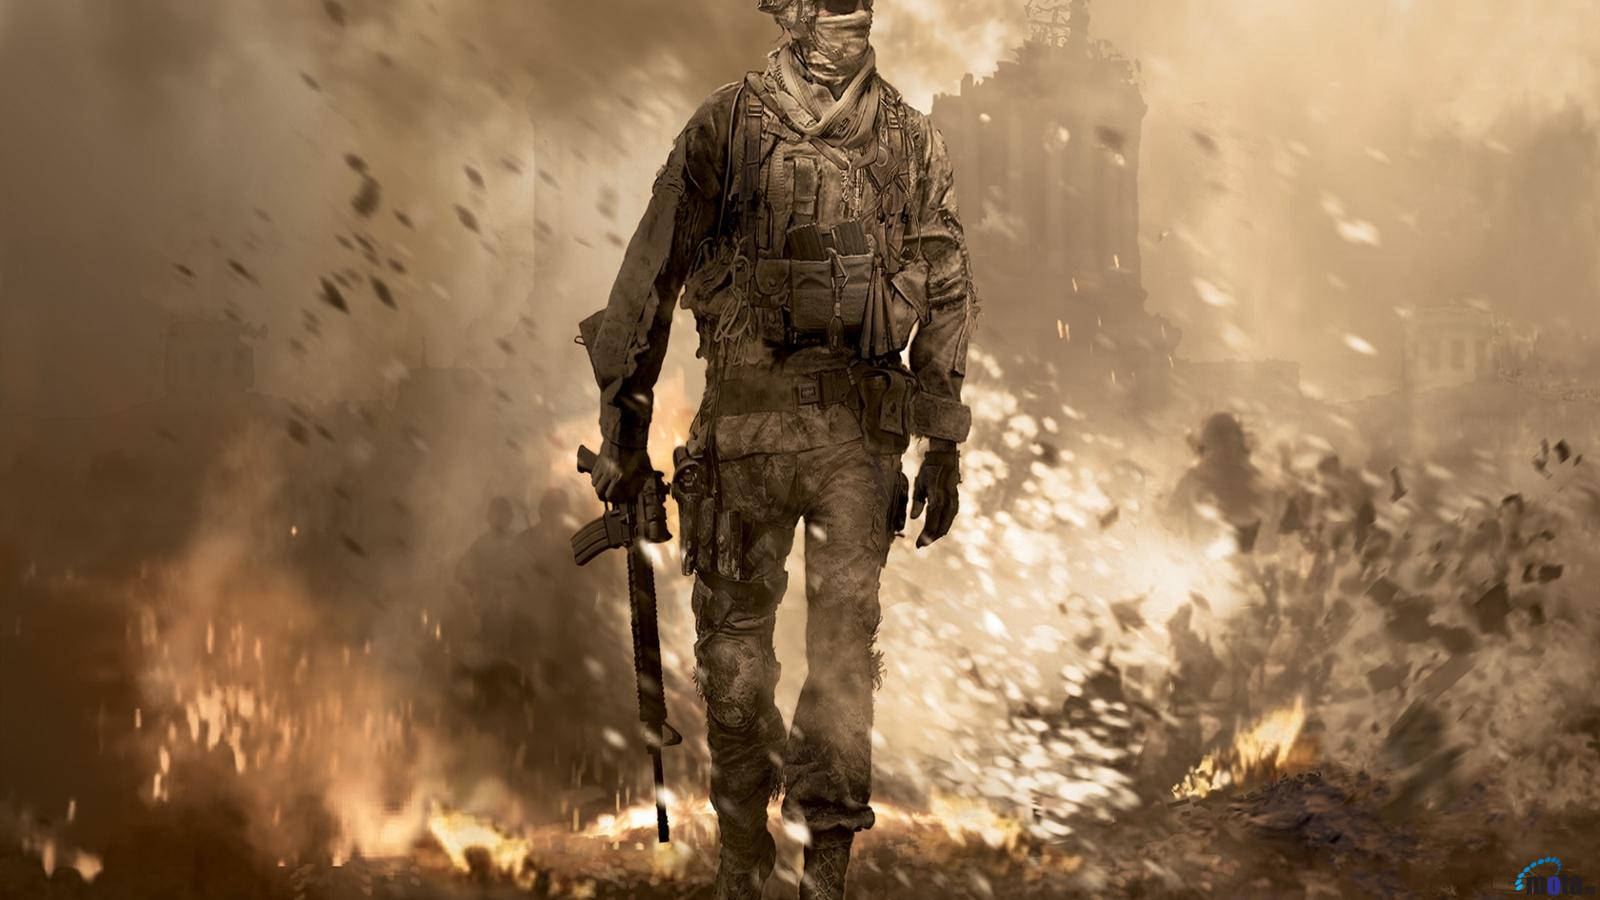 Feel The Adrenaline Rush With Call Of Duty: Modern Warfare 2 Wallpaper